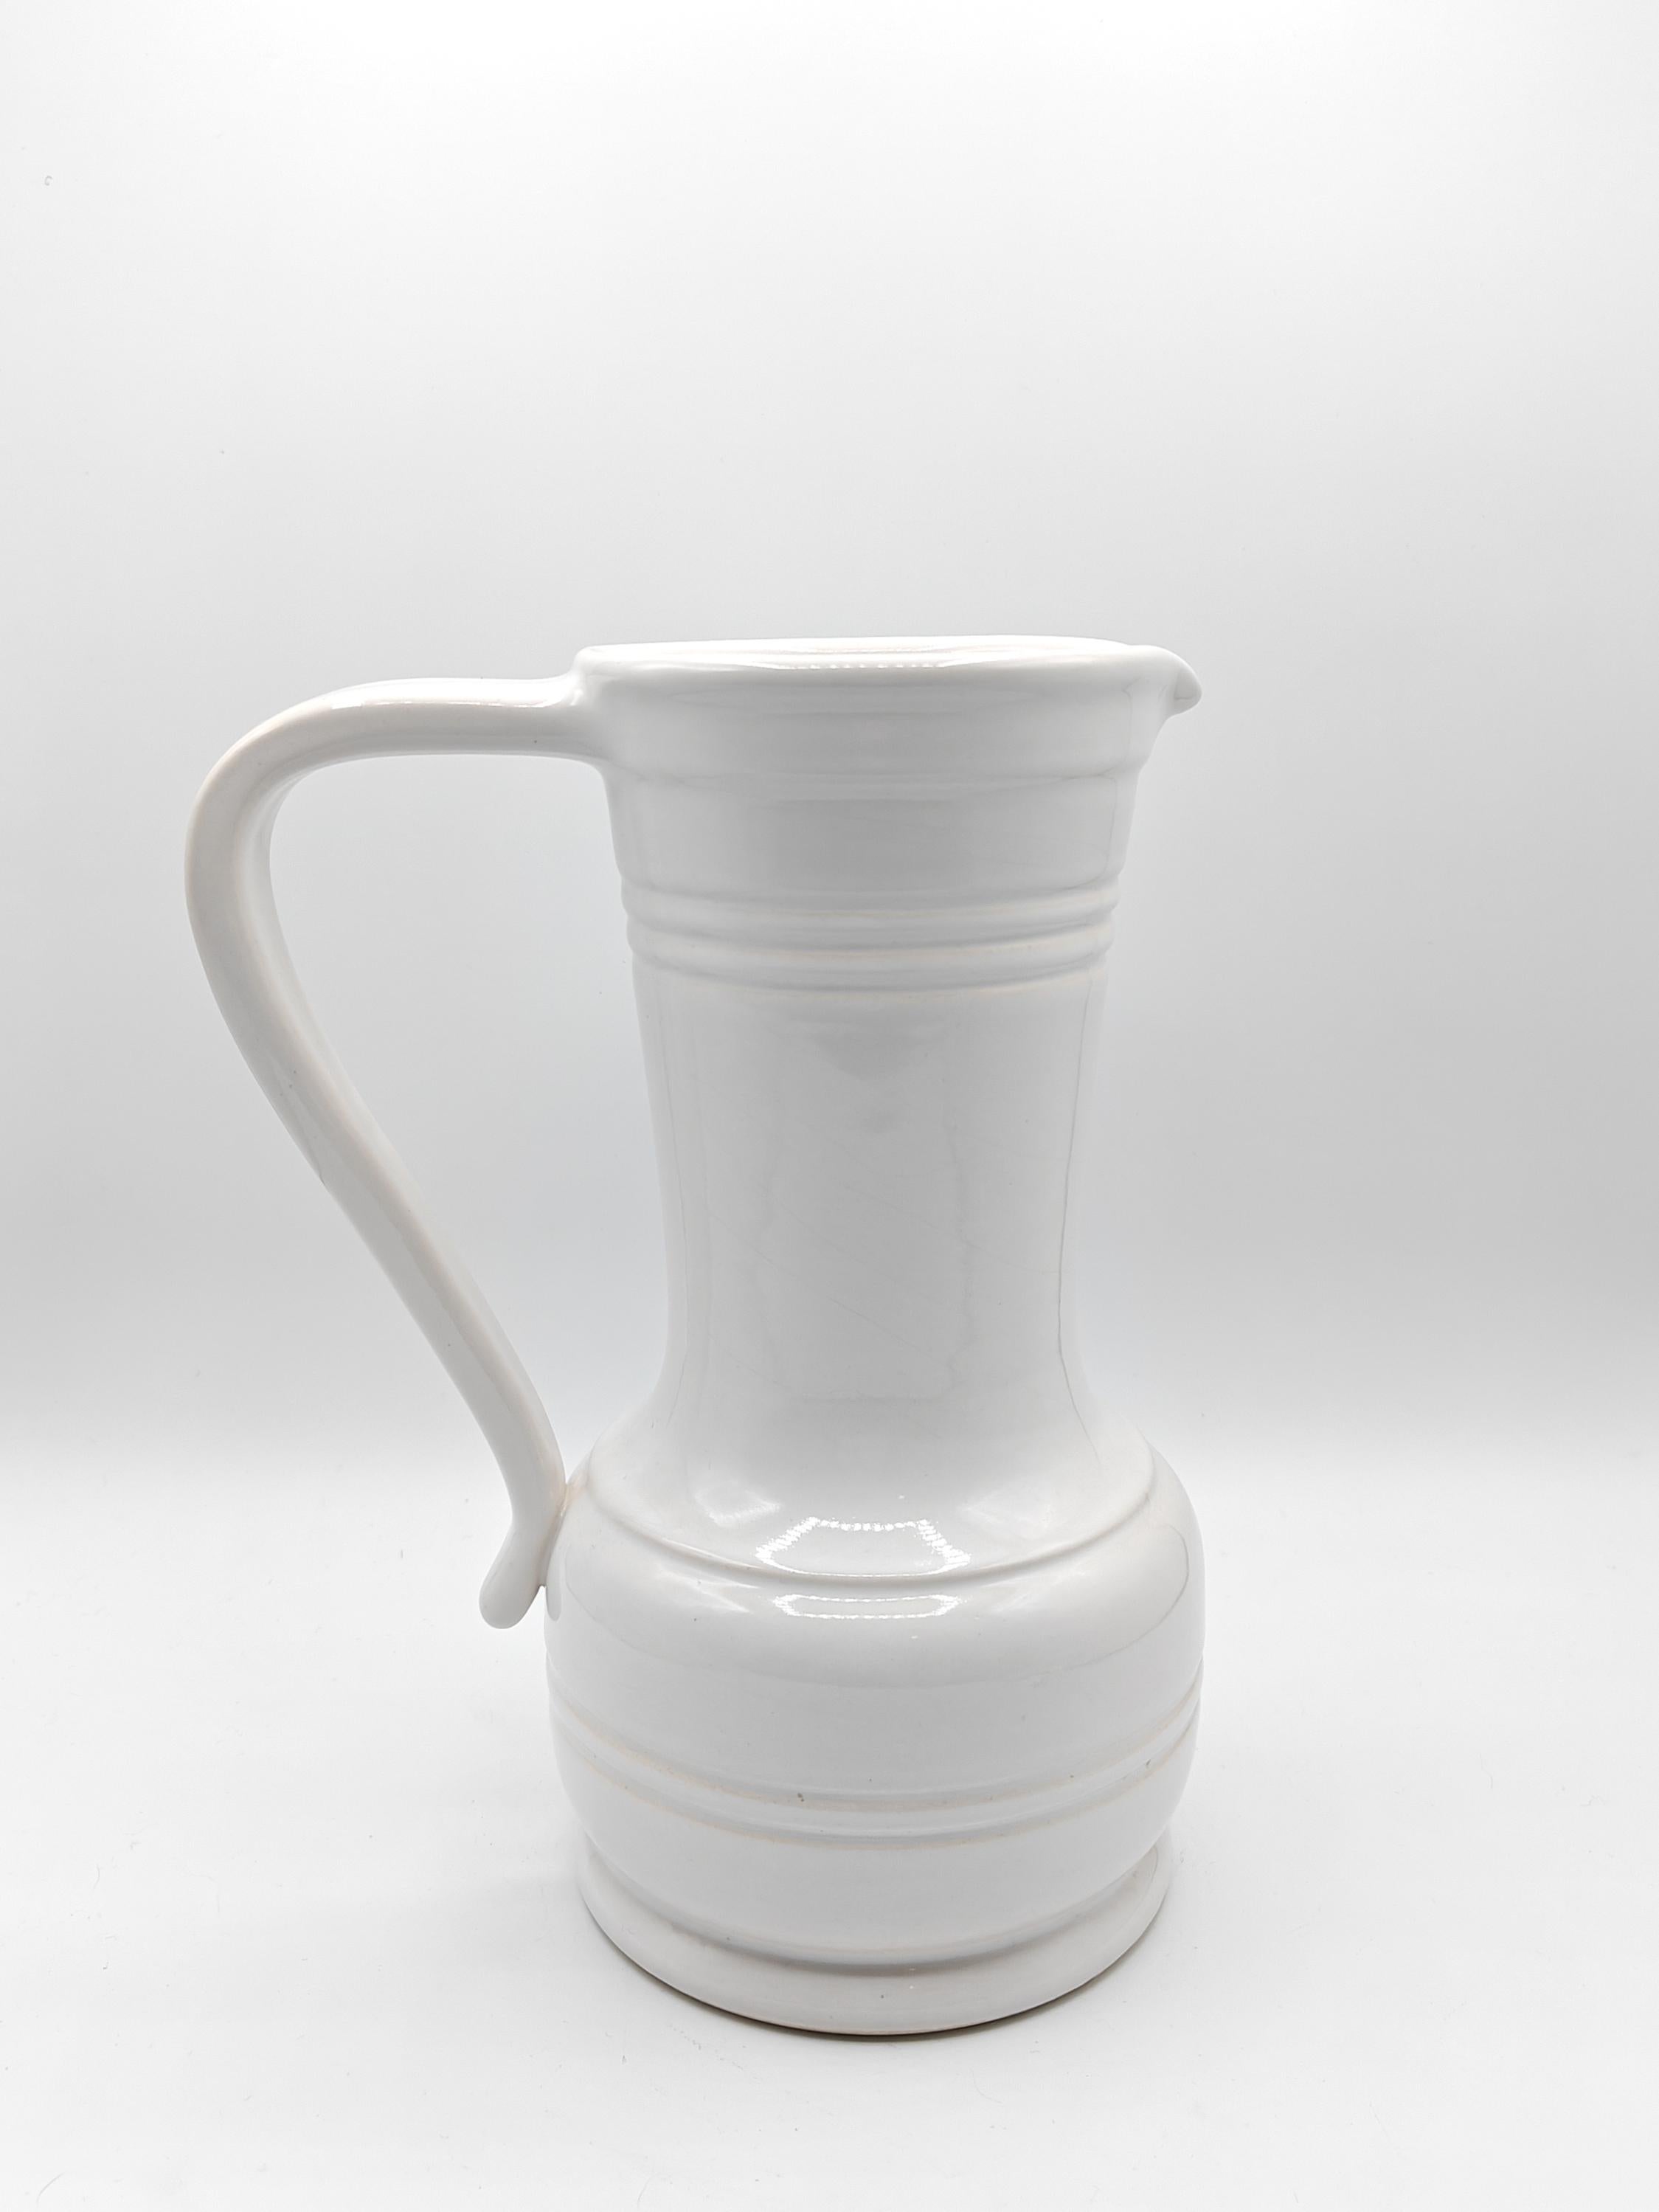 Very beautiful and rare pitcher by Pol Chambost from the early 1960s from a series where the pieces took their names from French regions and communes. This pitcher with pure white enamel and modern shapes, is signed 